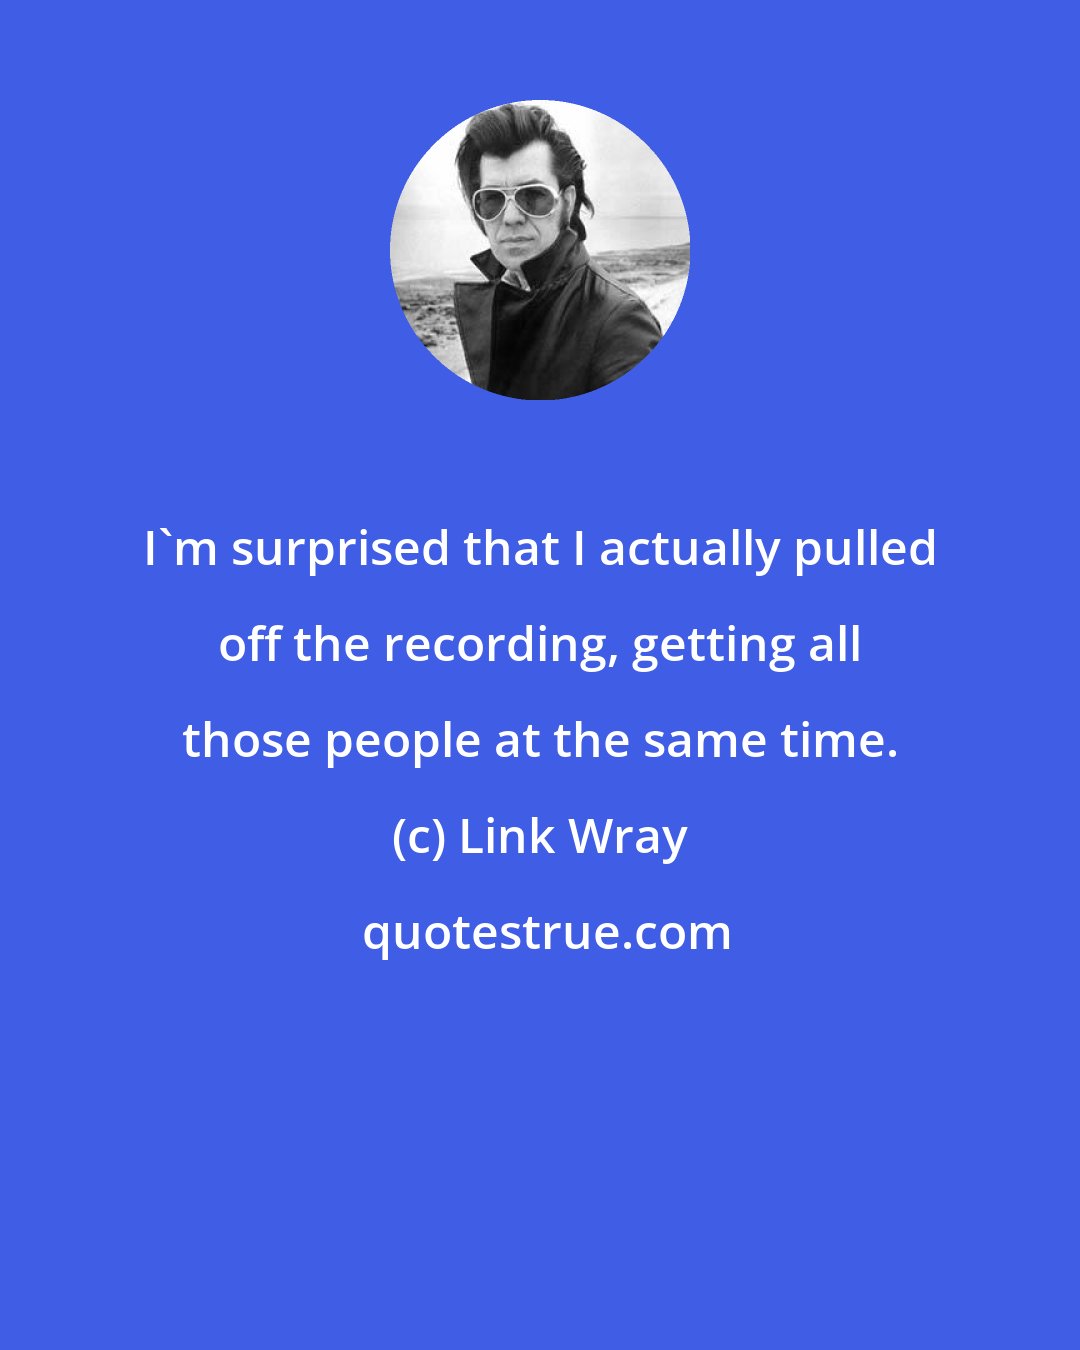 Link Wray: I'm surprised that I actually pulled off the recording, getting all those people at the same time.